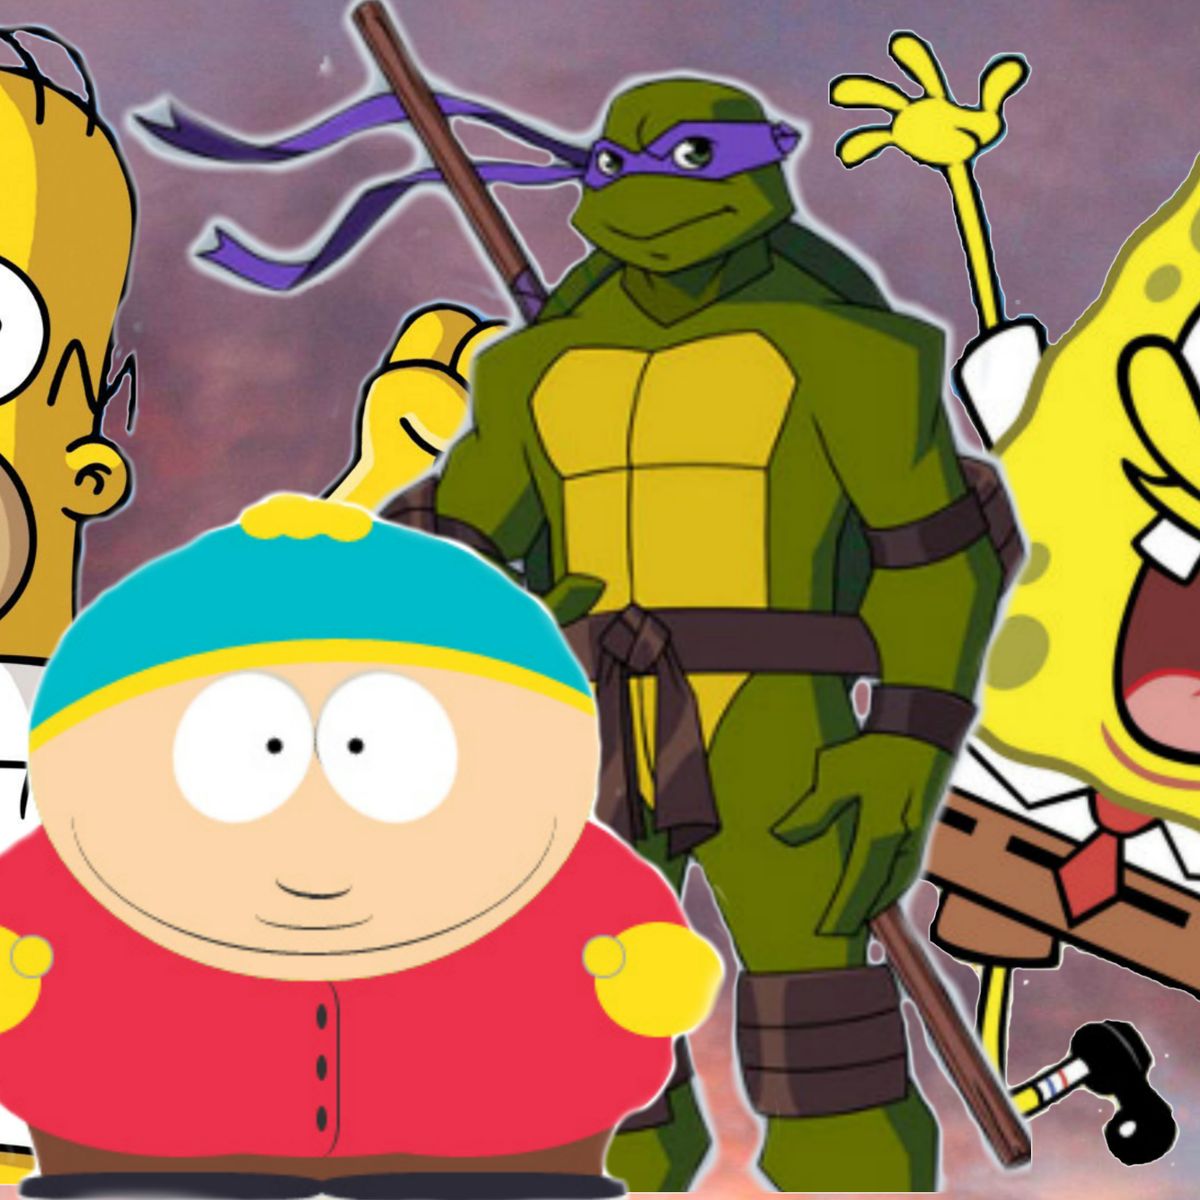 Want to know what the longest-running TV cartoons of all time are?